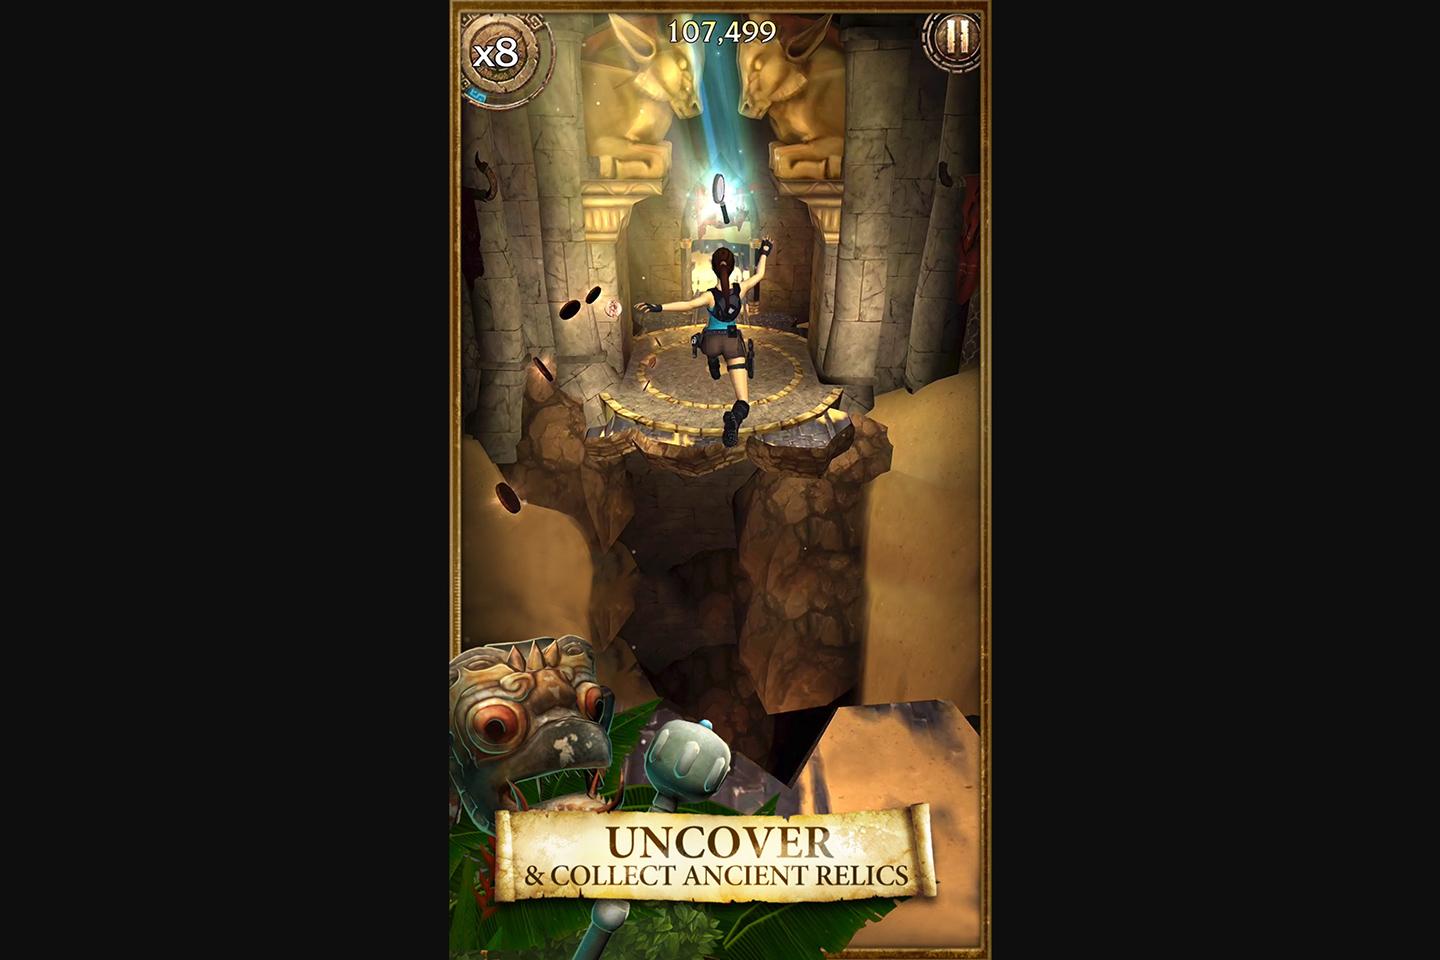 An in-game action scene displaying Lara Croft leaping over a chasm in a cave, with a caption 'Uncover & Collect Ancient Relics,' highlighting the game's exploration aspect.